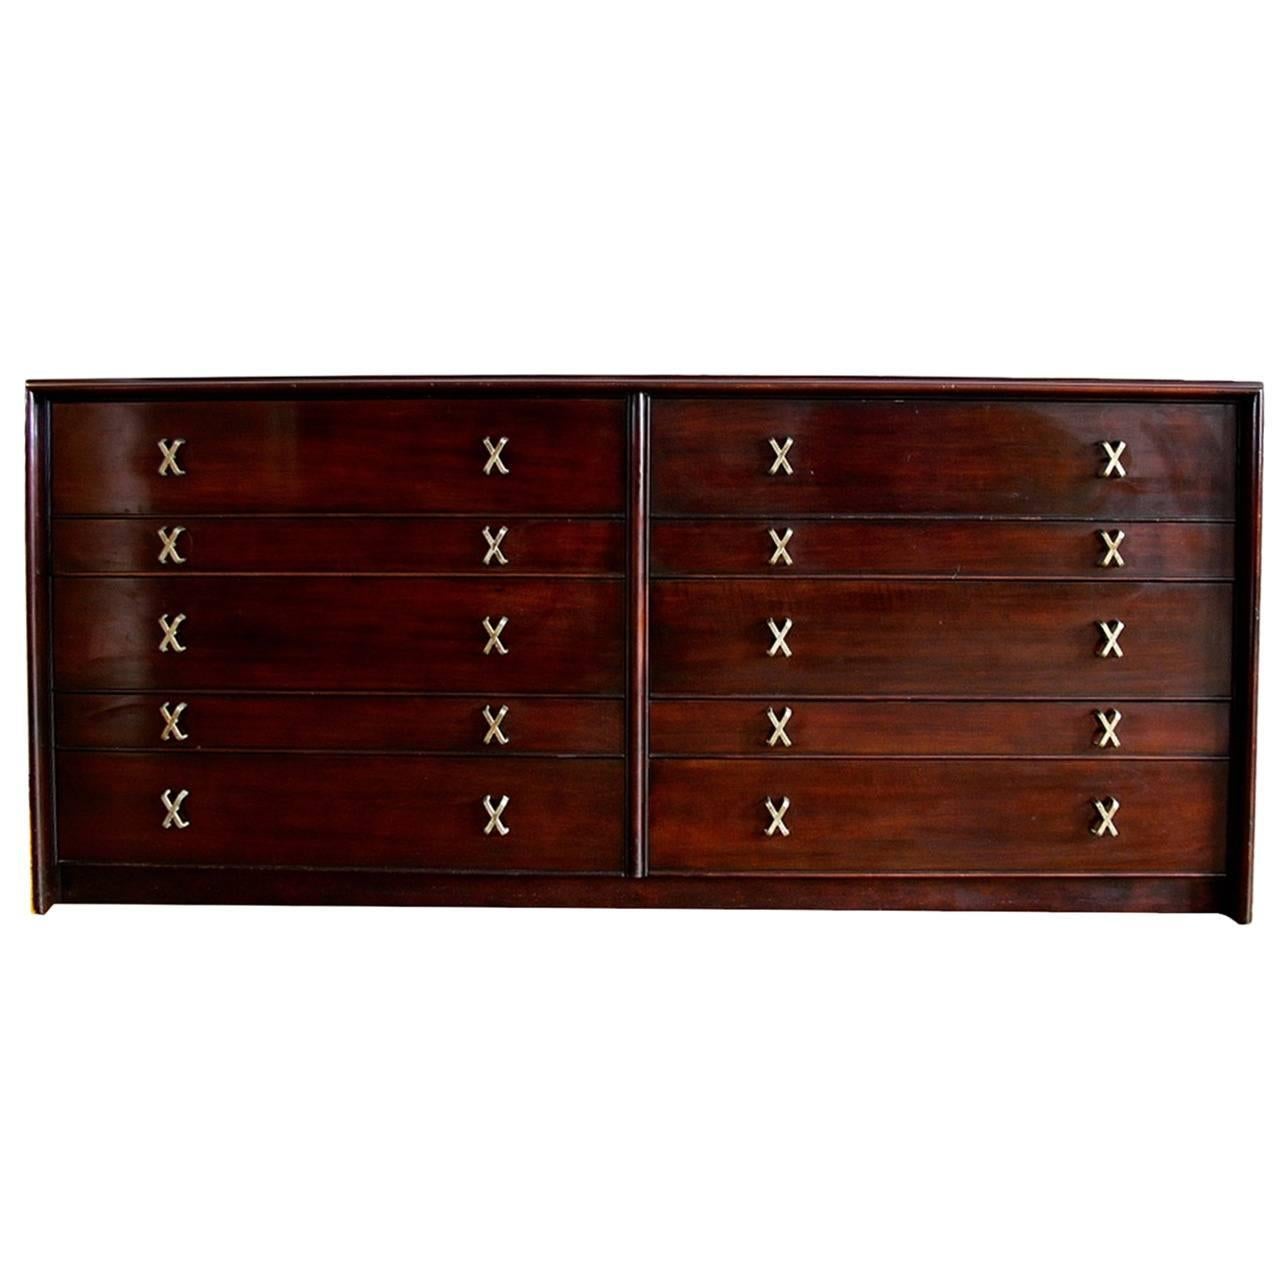 Paul Frankl for Johnson Furniture Mahogany Ten-Drawer Dresser with X Pulls